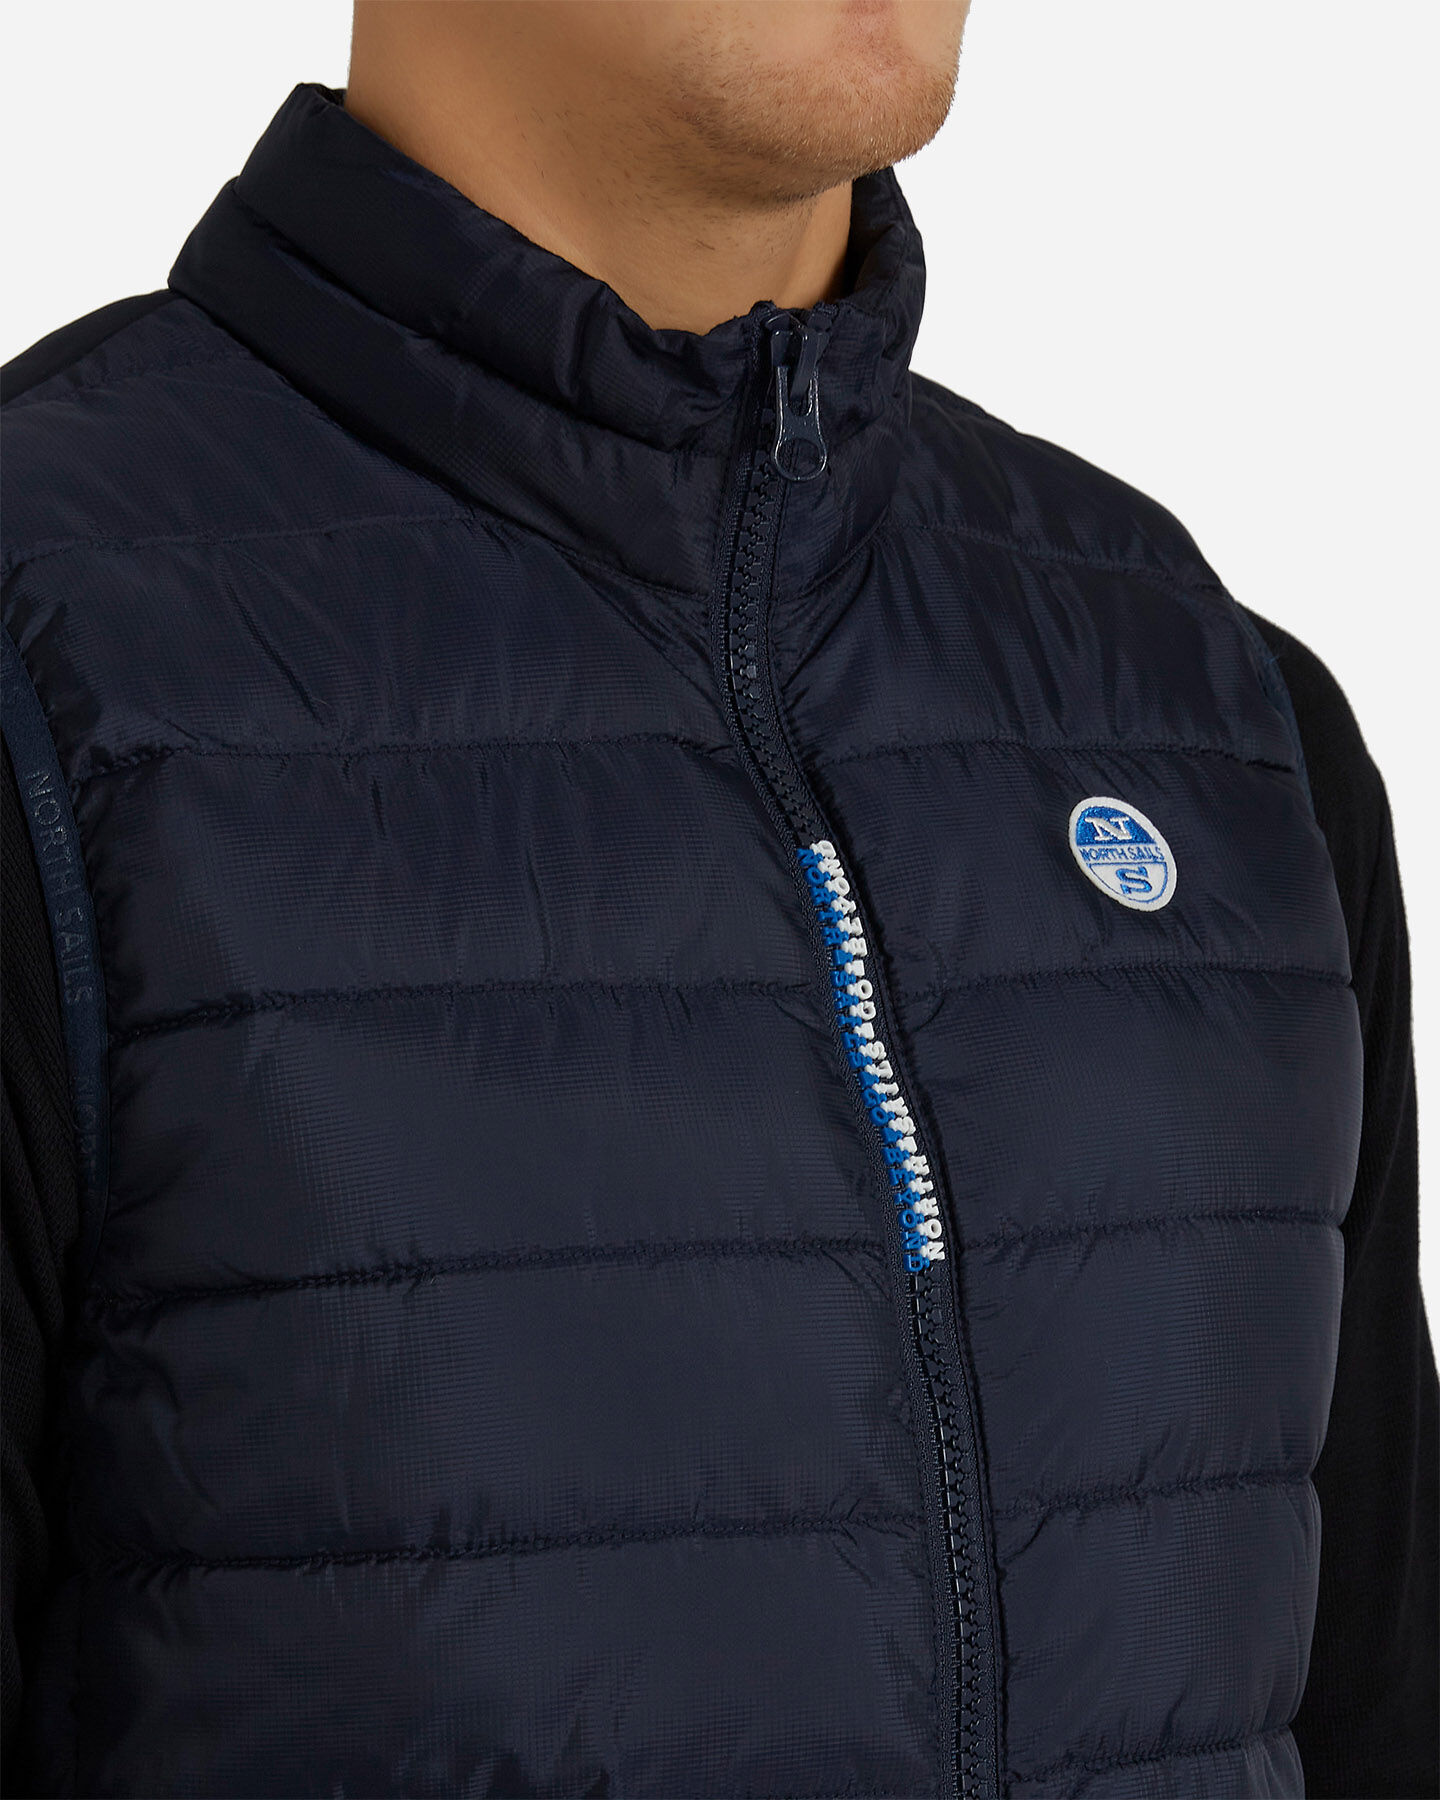  Gilet NORTH SAILS RECYCLED SKYE2 M S4082711|0802|S scatto 4